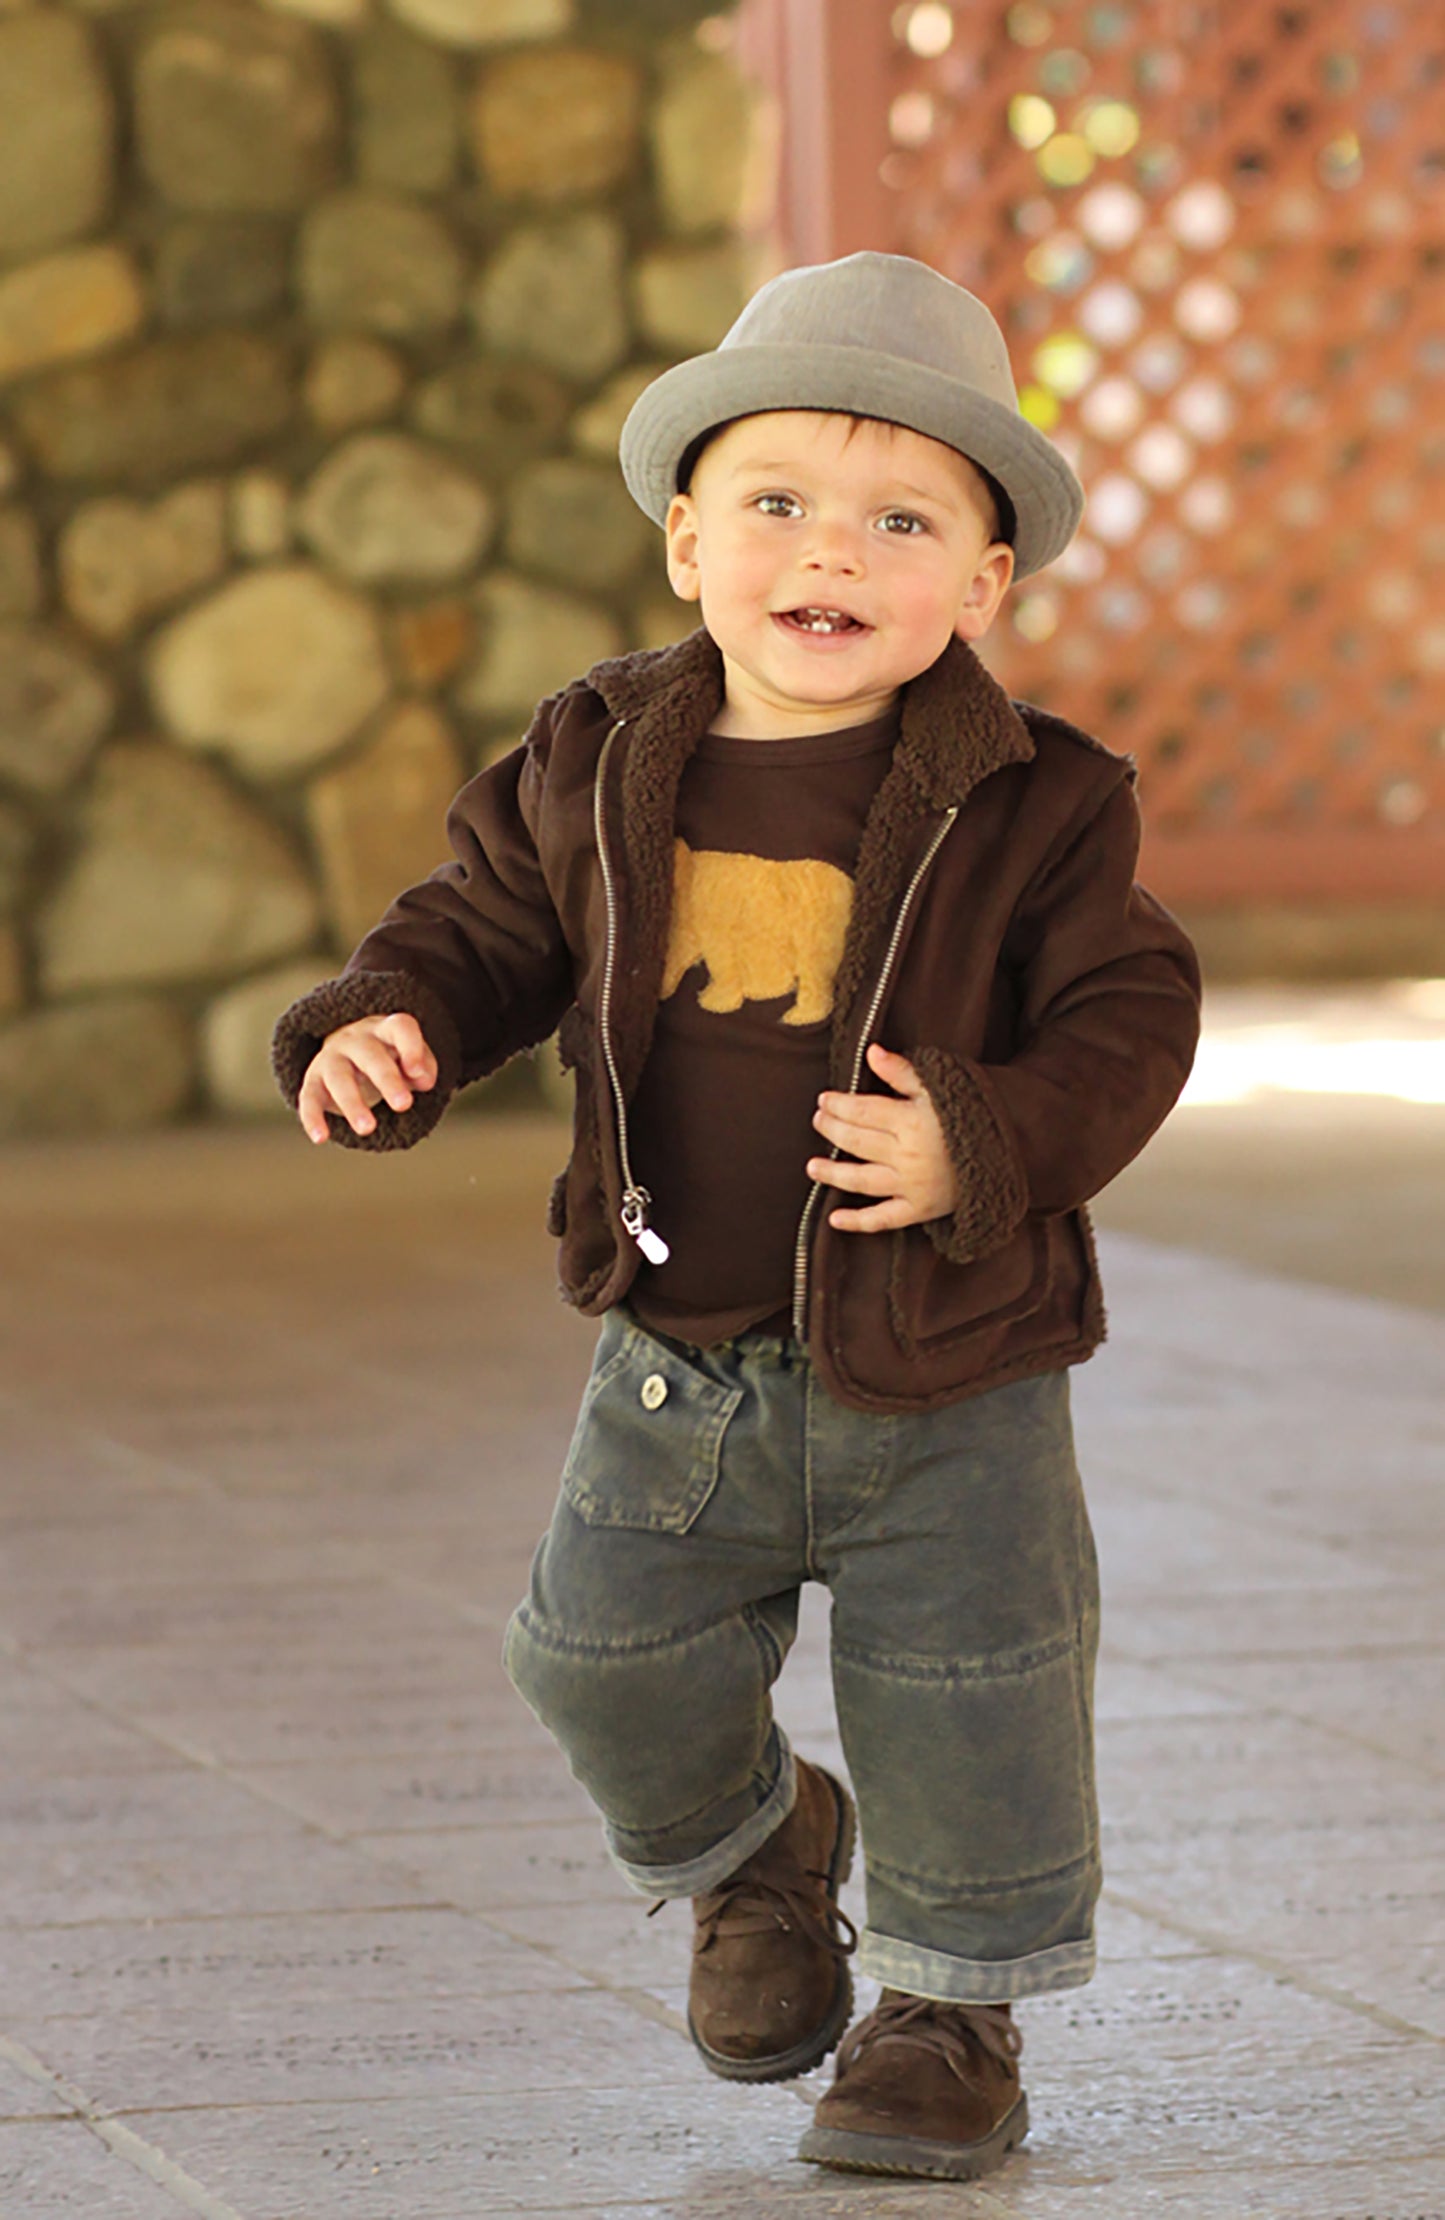 Boys favorite aviator jacket in super soft suede and fleece, has slightly longer sleeves so they can be rolled up or left down. Tone on tone suede and fleece in coffee brown, or two tone charcoal black suede with dove grey fleece. Faux zipper, along with two front pockets keep winter hands cozy and warm. Machine wash cold, line dry Made in the USA